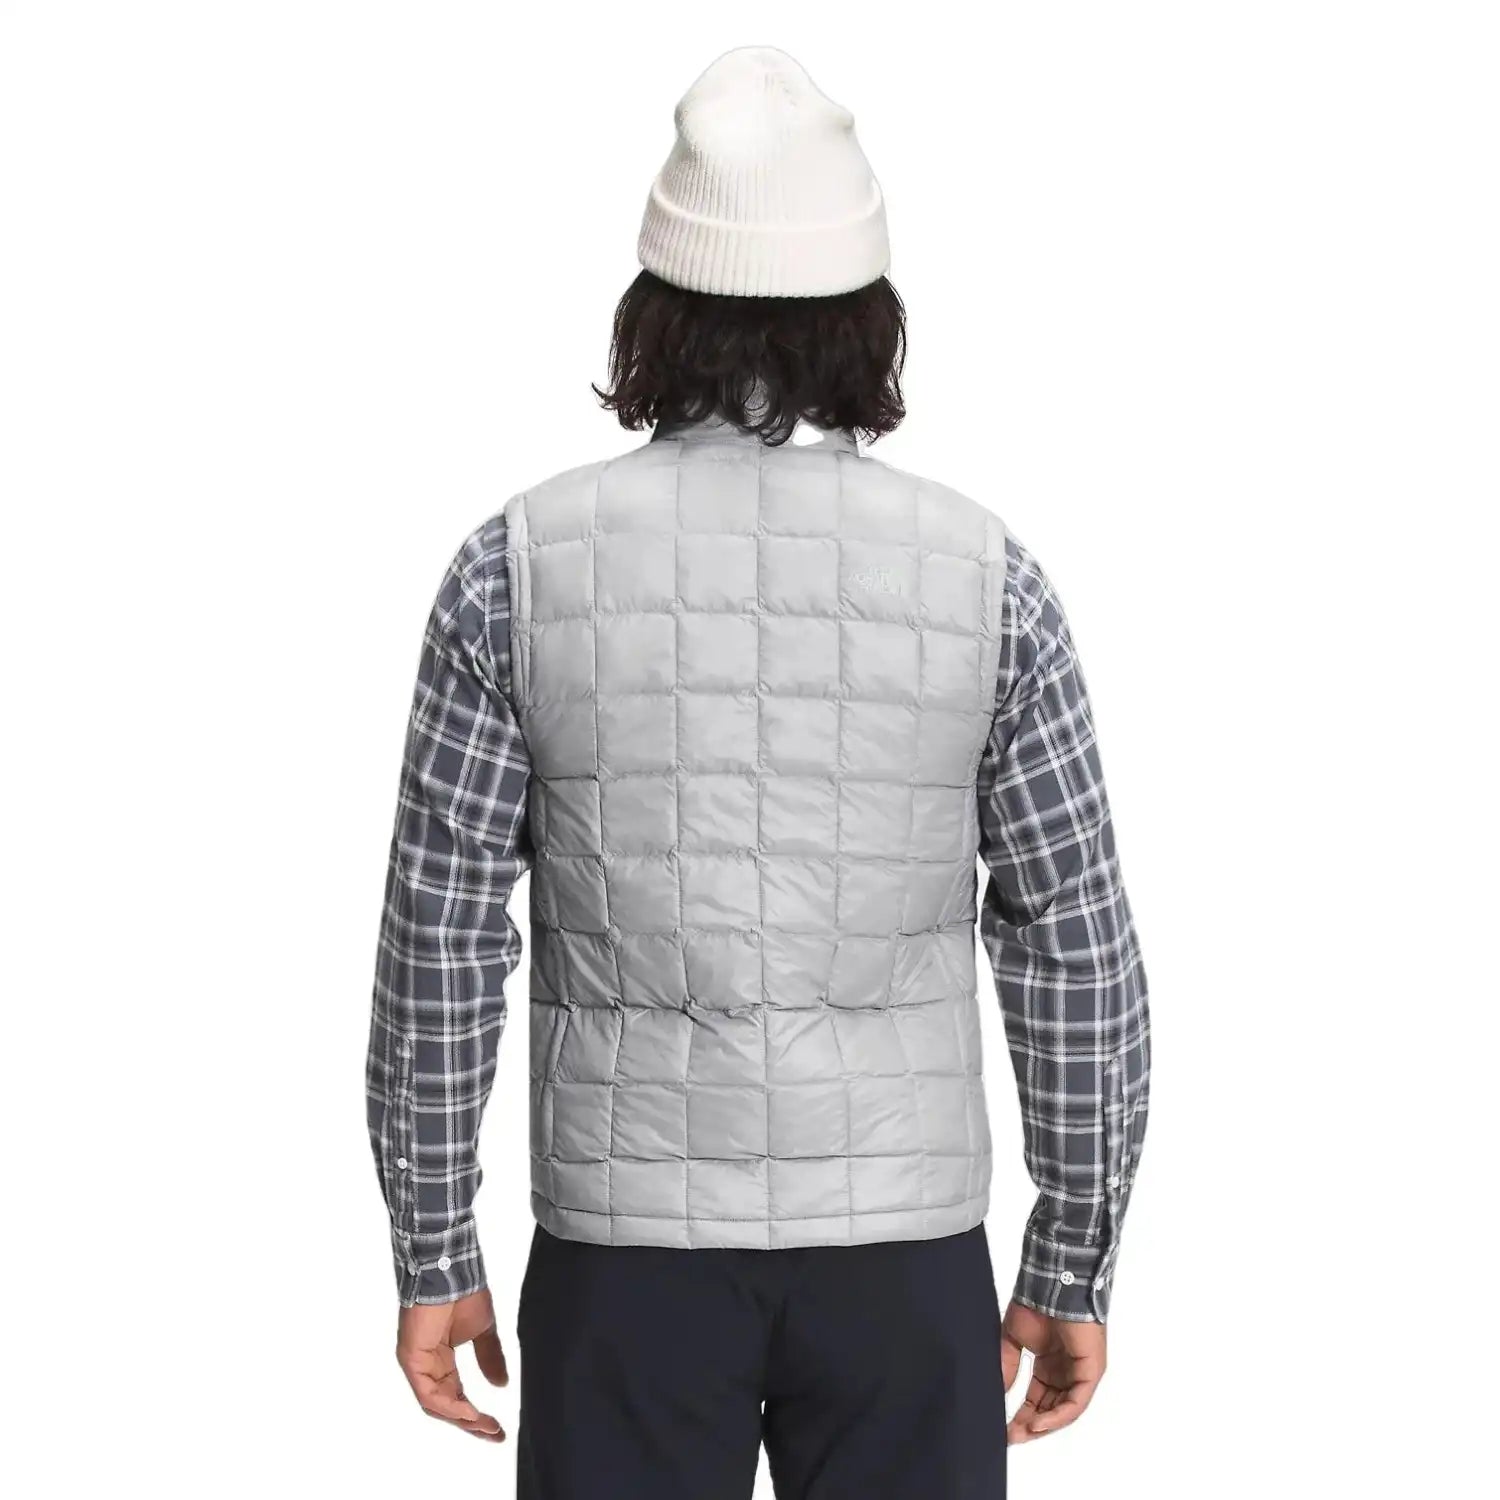 The North Face M's ThermoBall™ Eco Vest 2.0, Meld Grey, back view on model